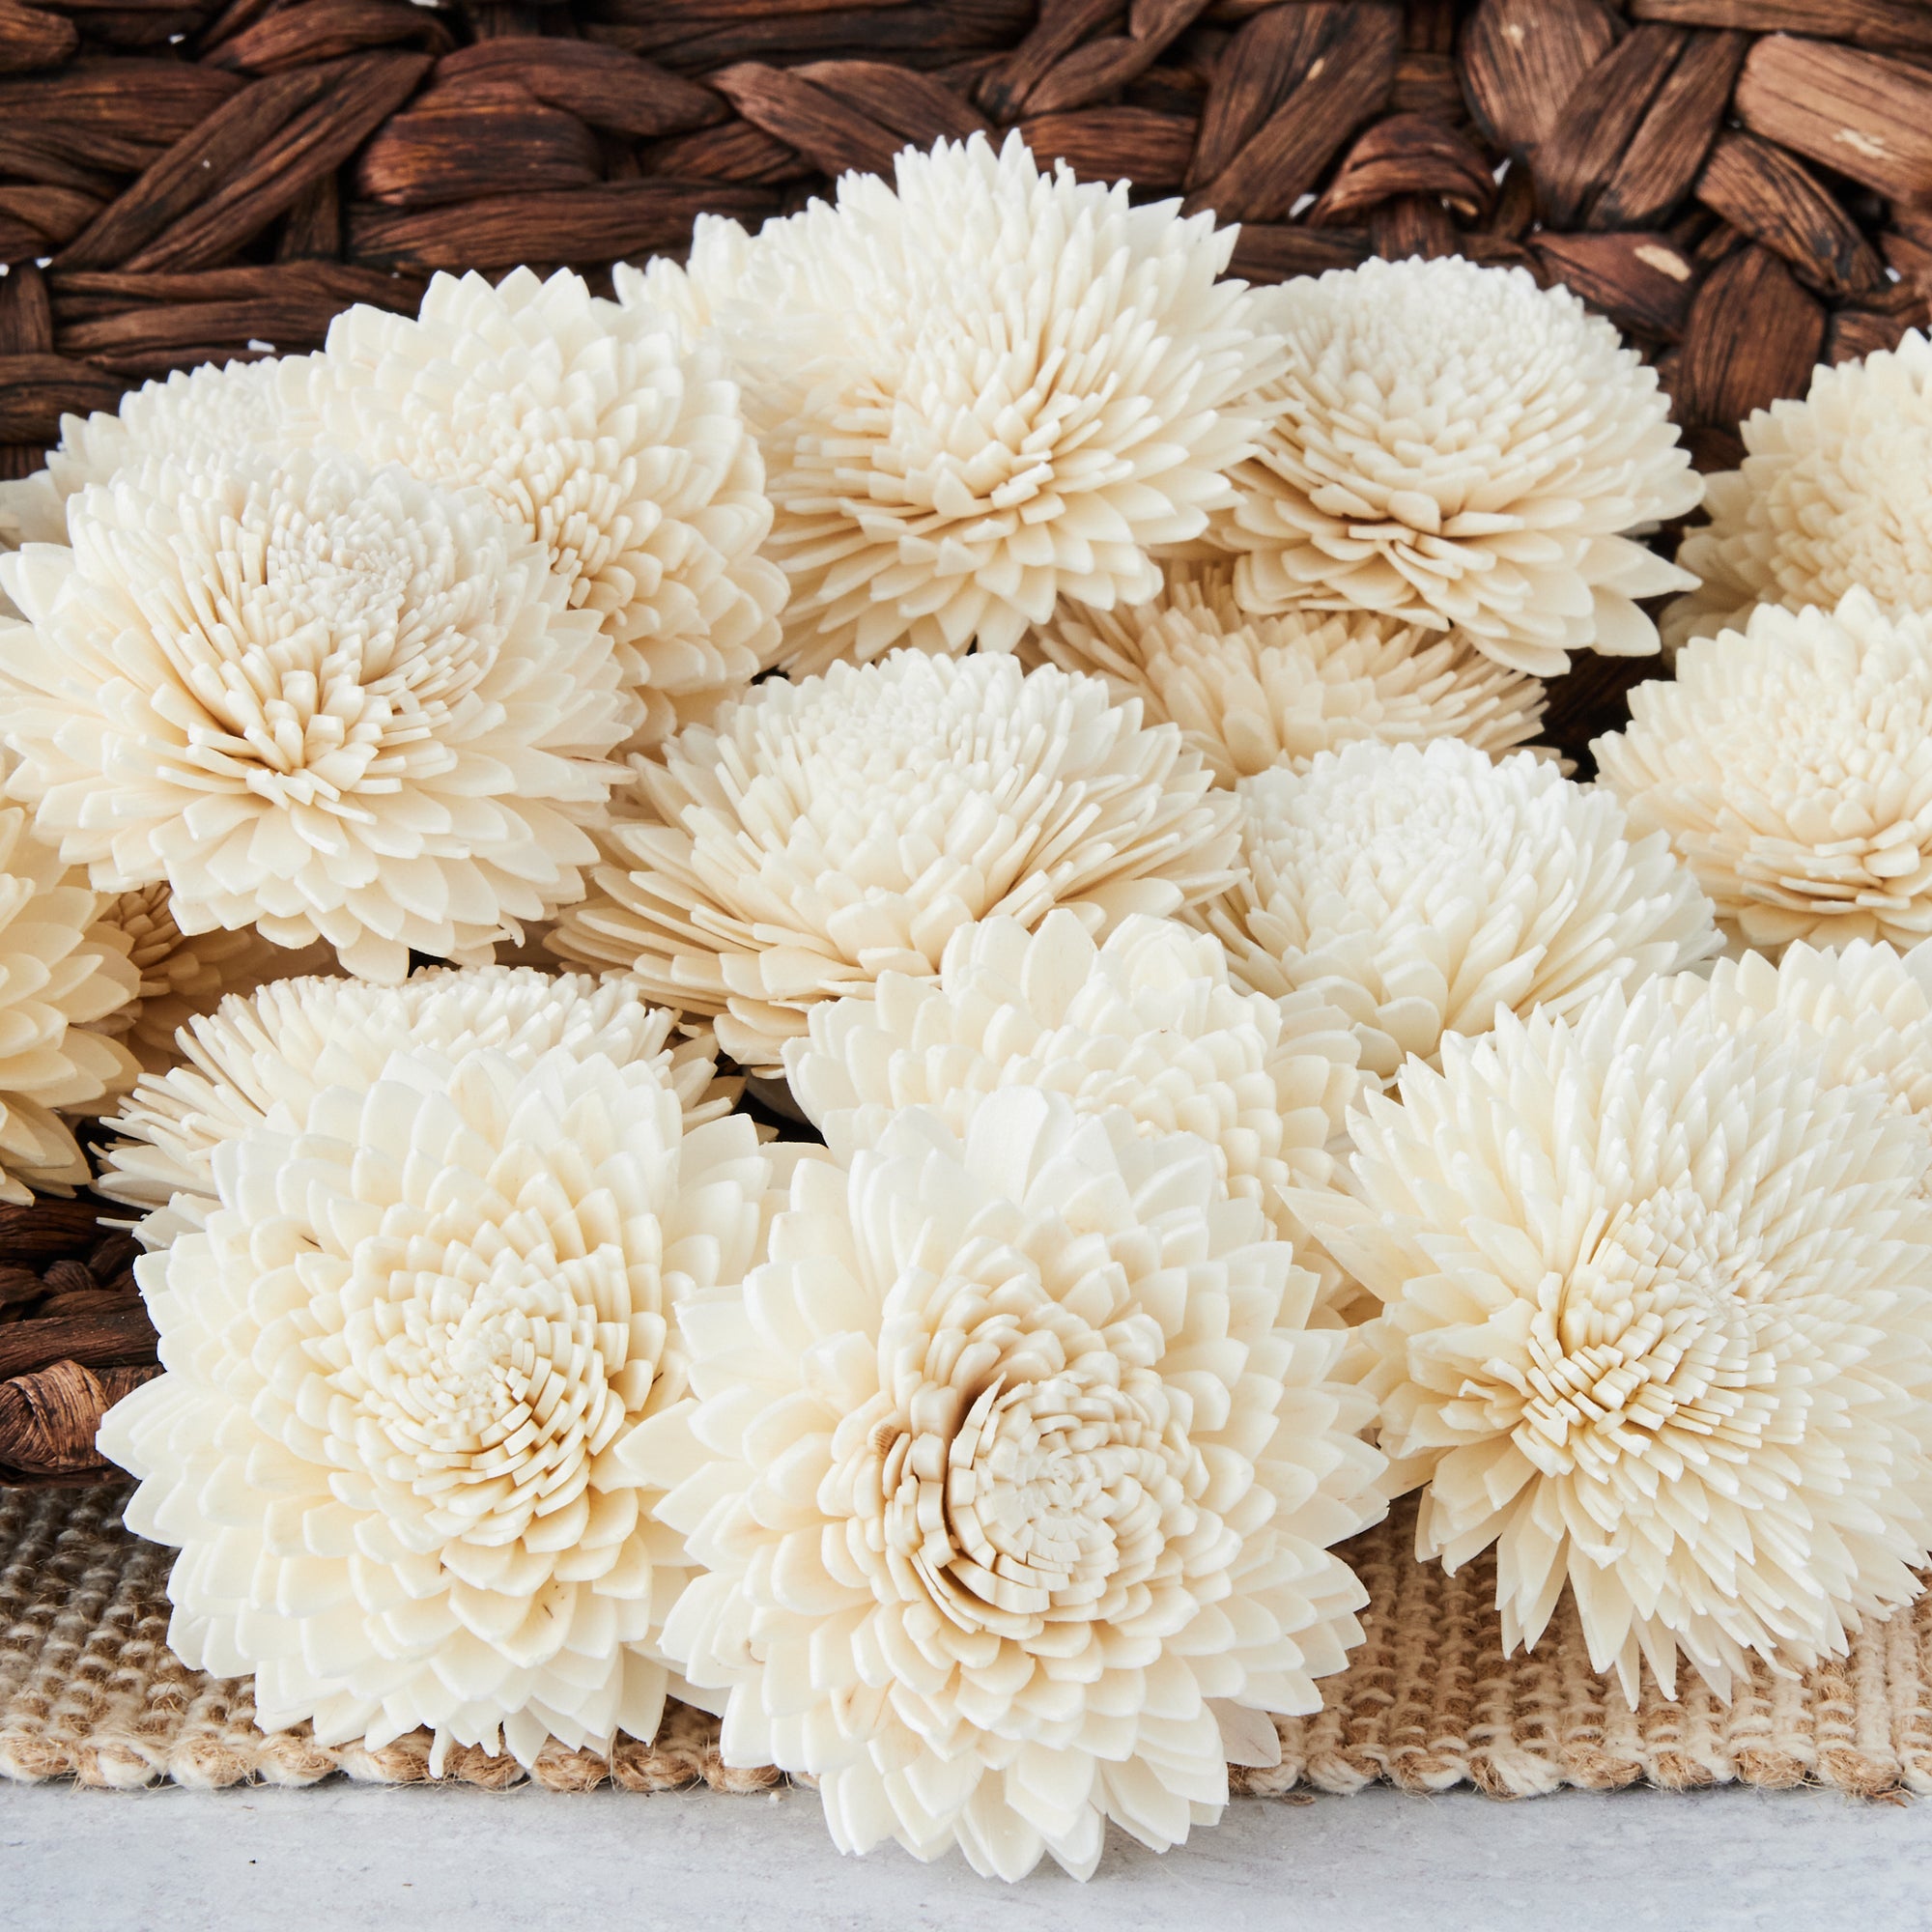 Sola Wood Flower Bouquet Dried Flowers at best price in South 24 Parganas